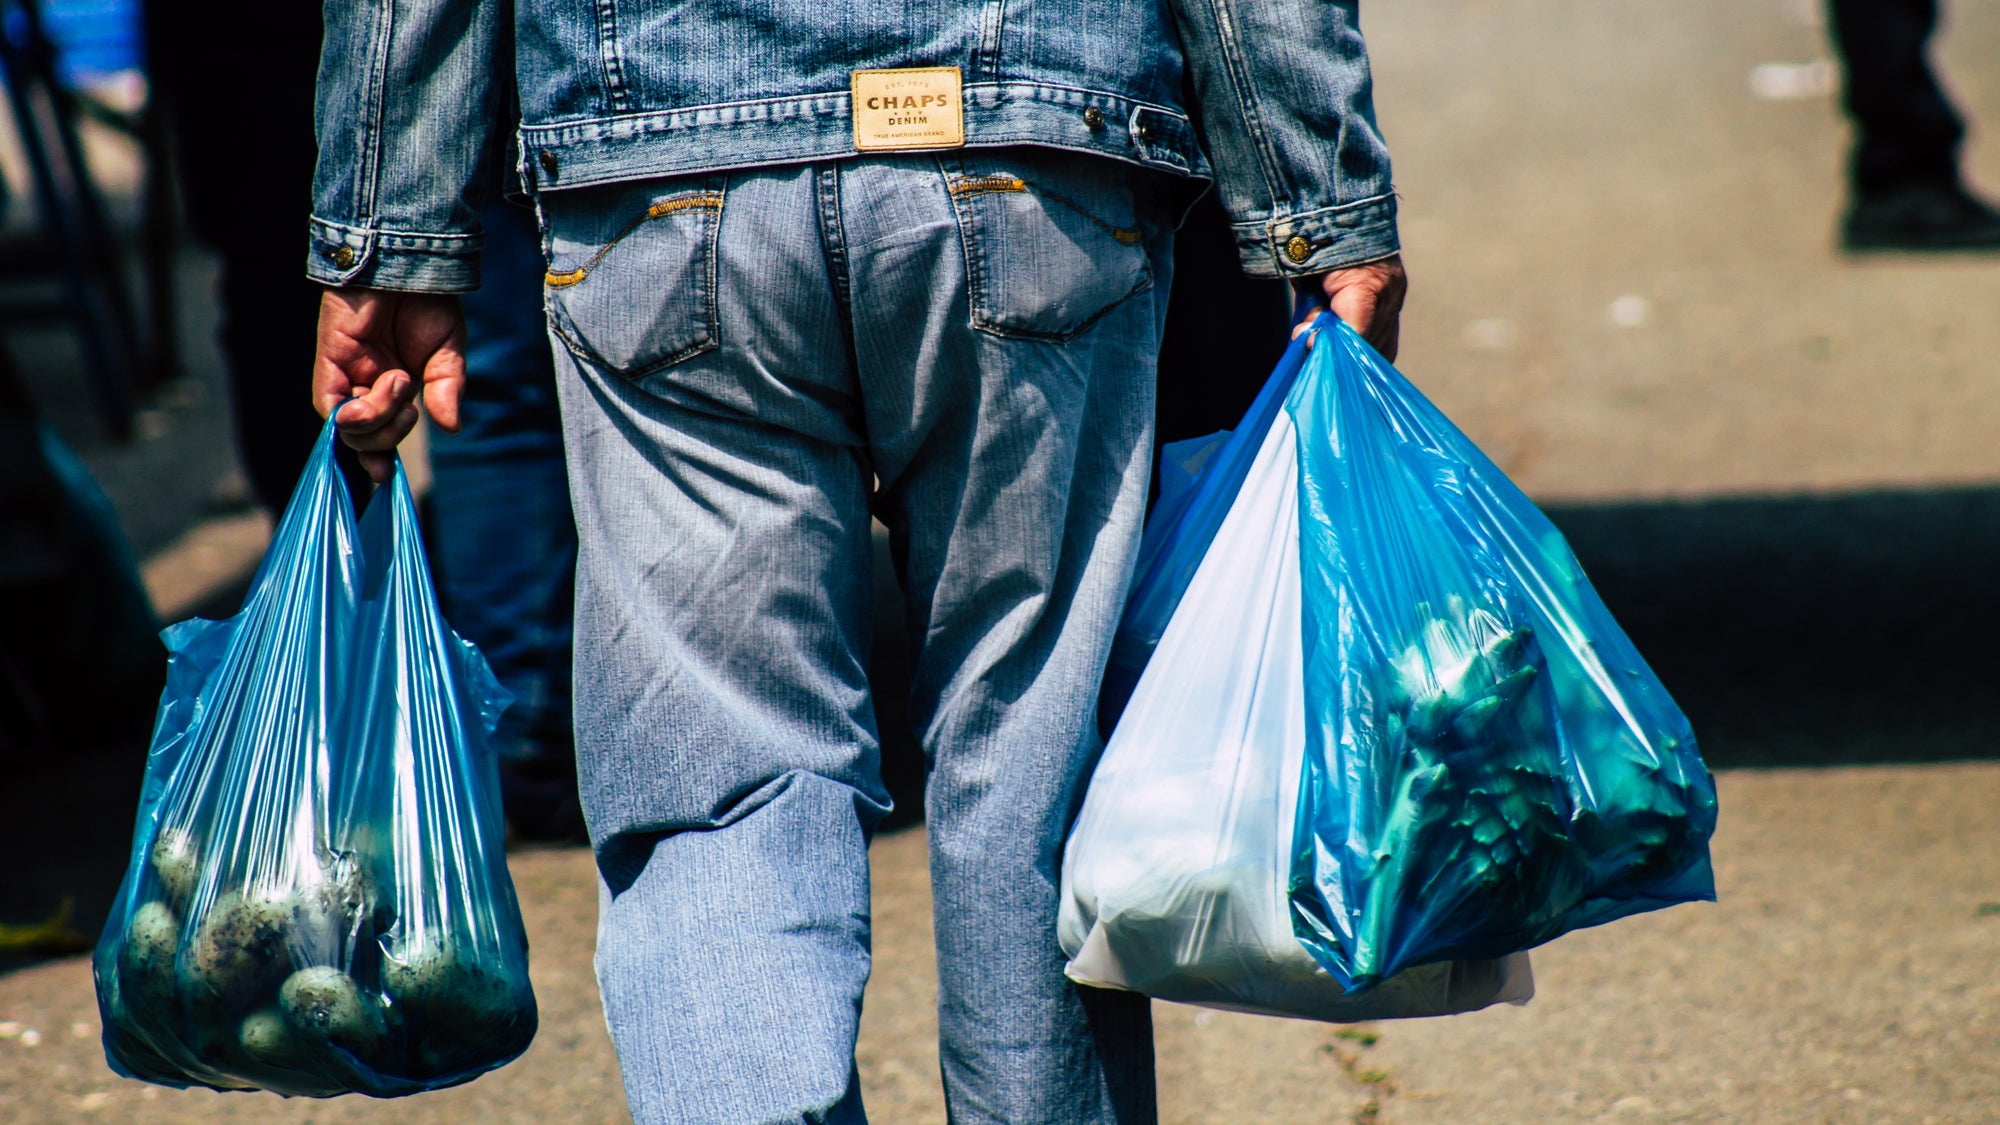 Plastic bag bans have already prevented billions of bags from being used, report finds